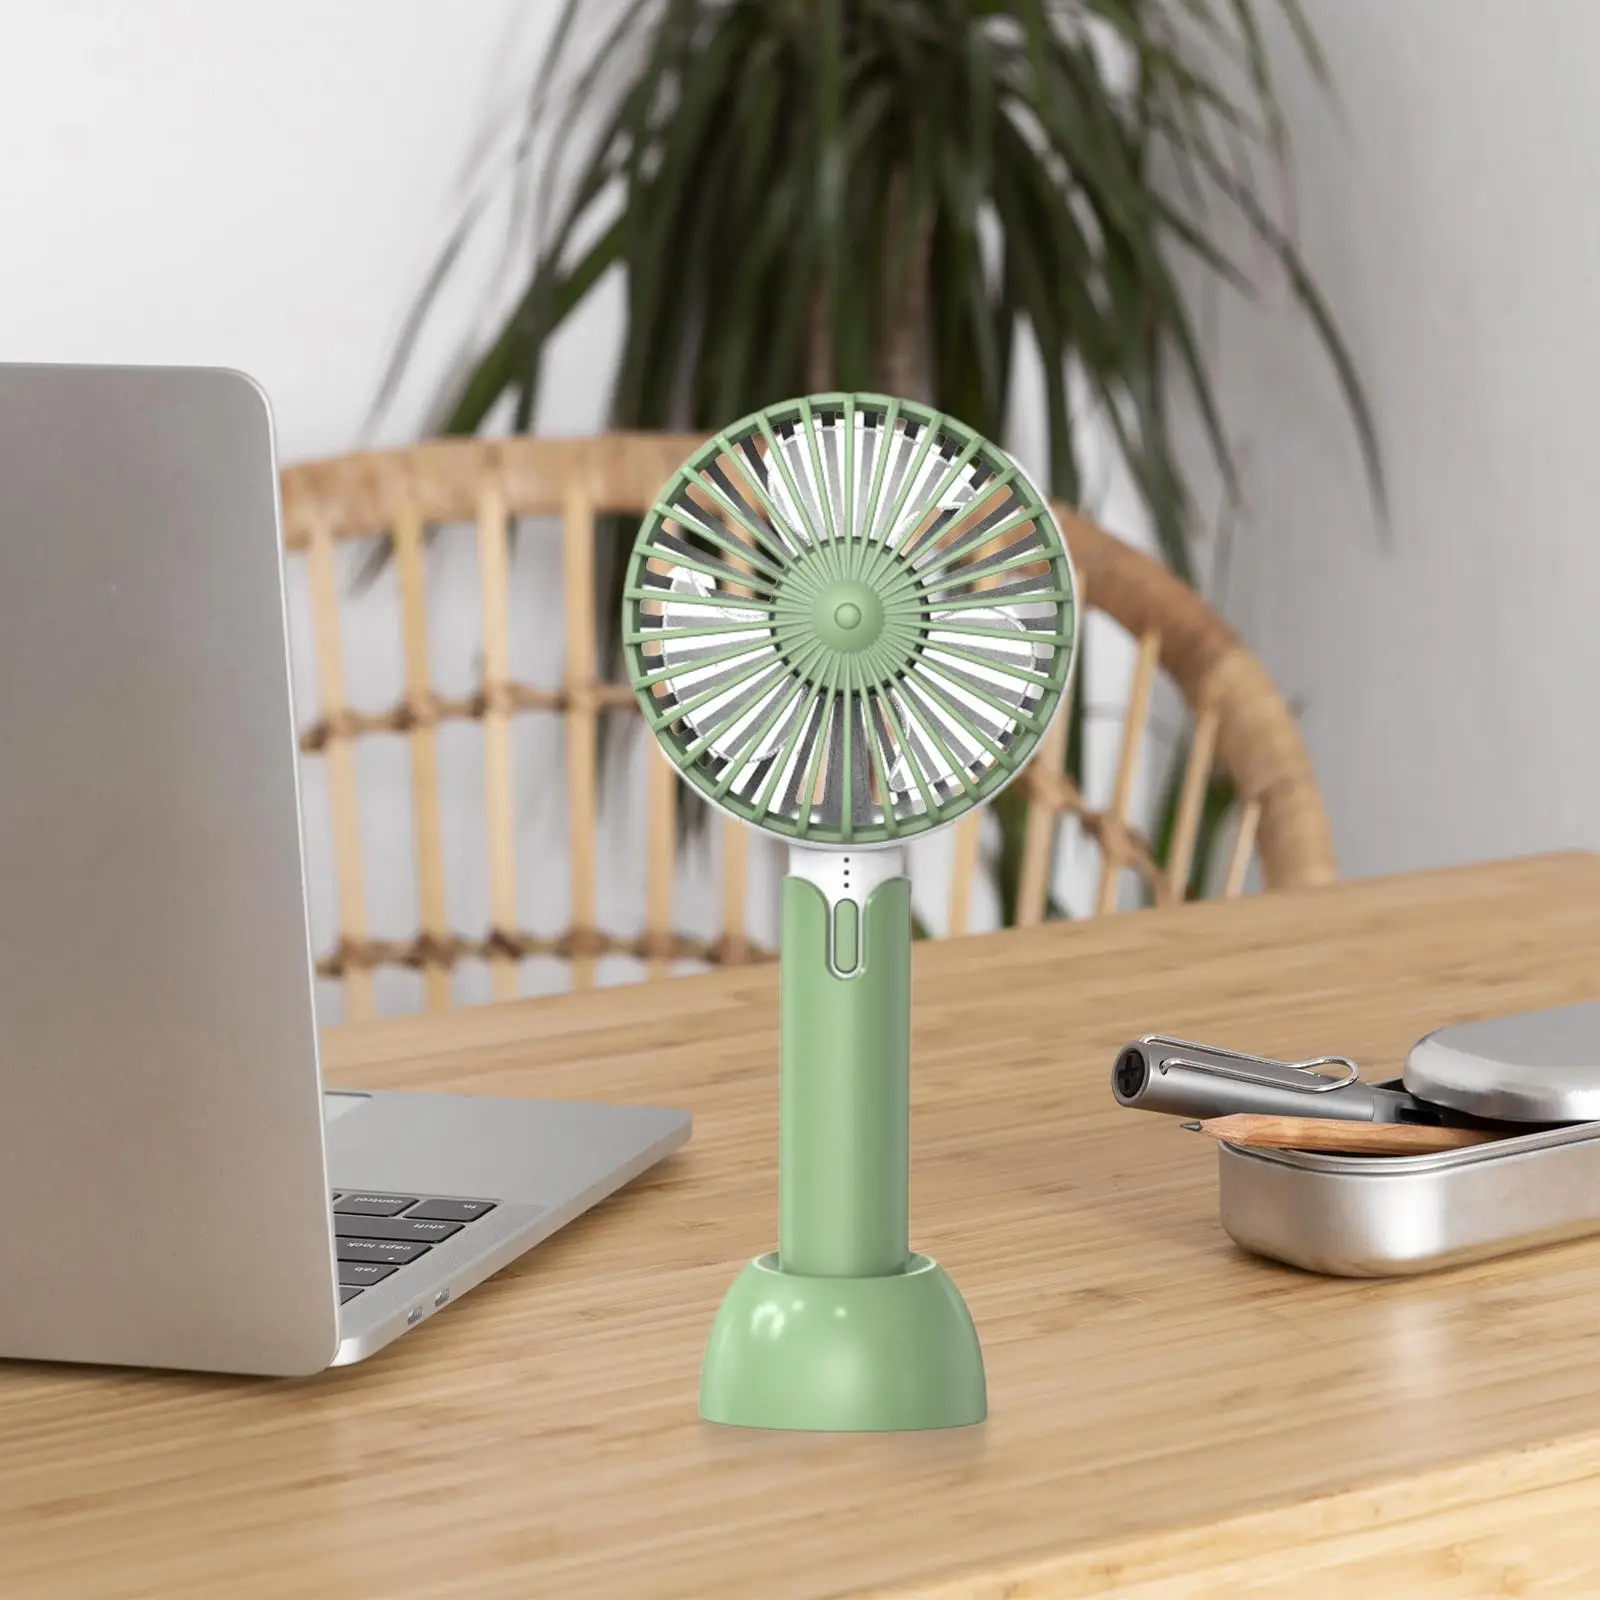 Handheld Fan Powerful USB Rechargeable Quiet Operation Air Cooling Fan for Indoor Outdoor Beach Backpacking Travel Camping